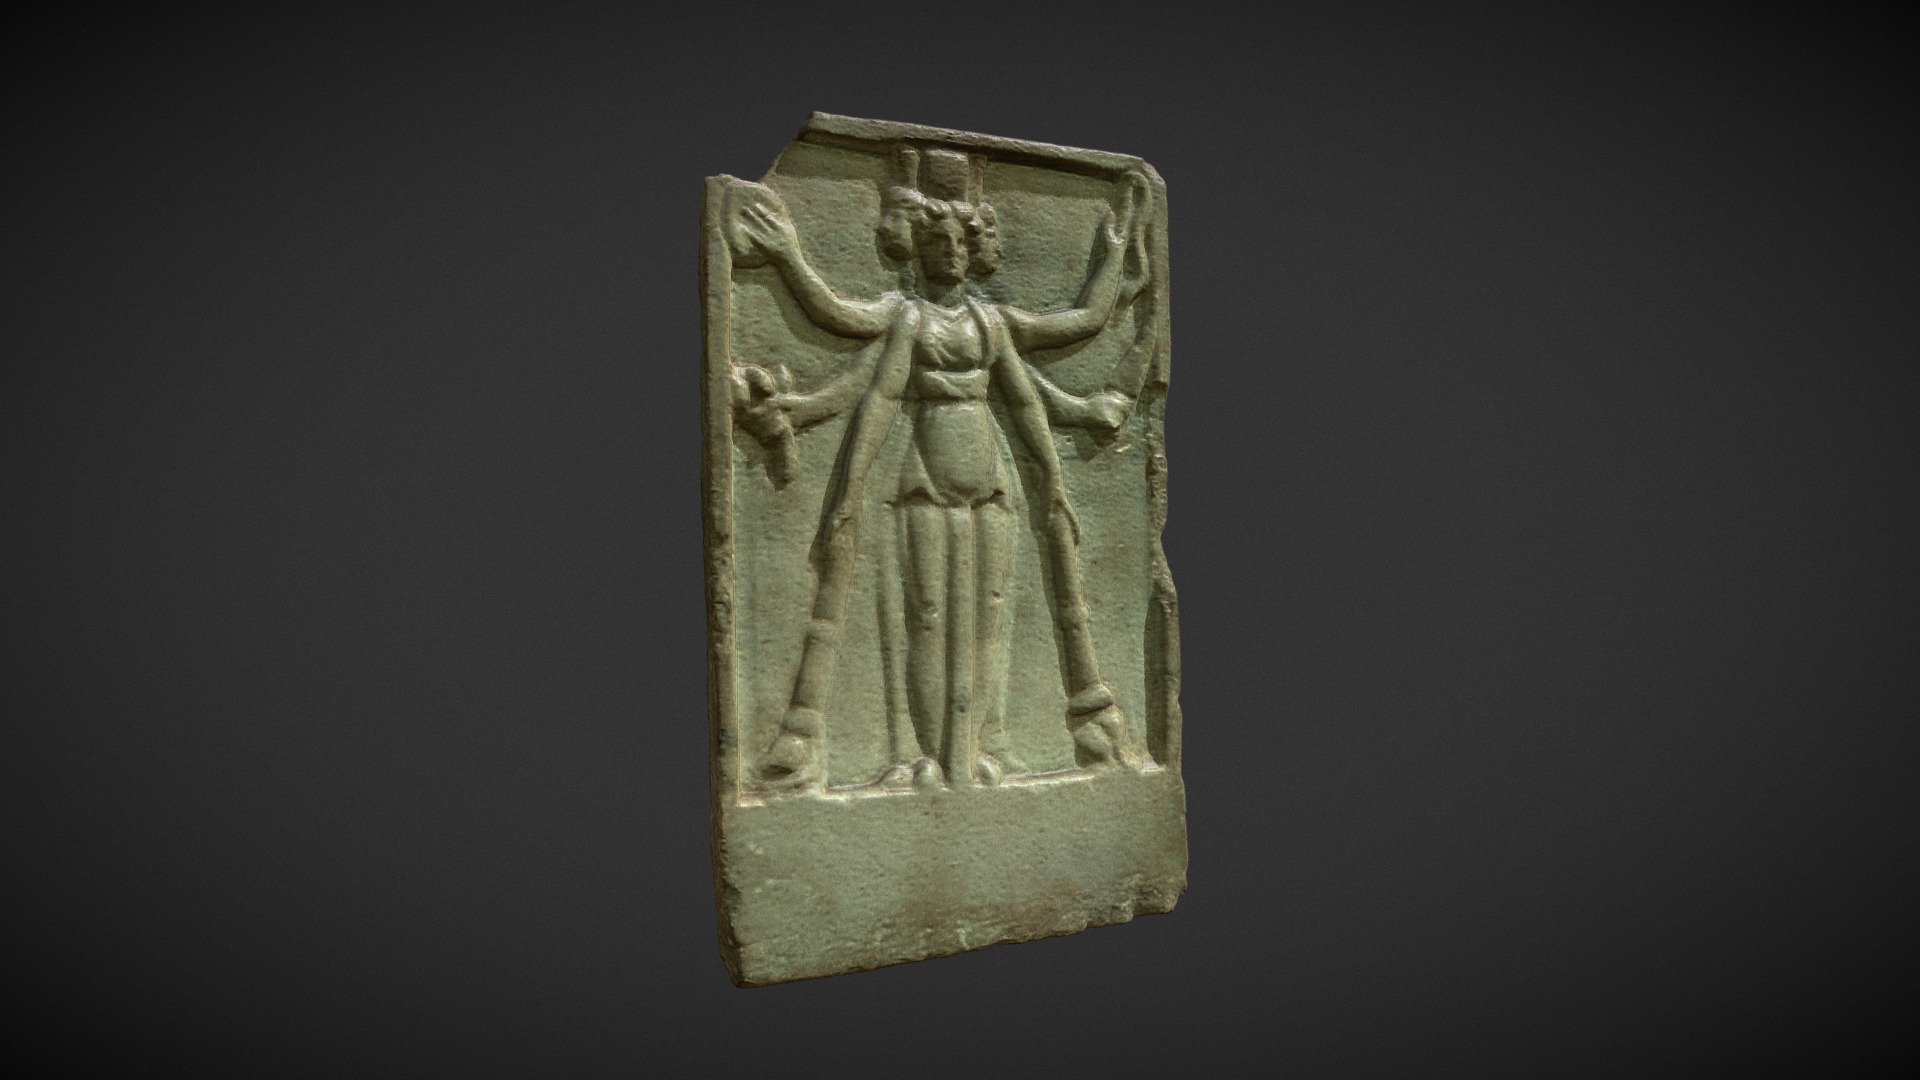 HECATE BAS-RELIEF